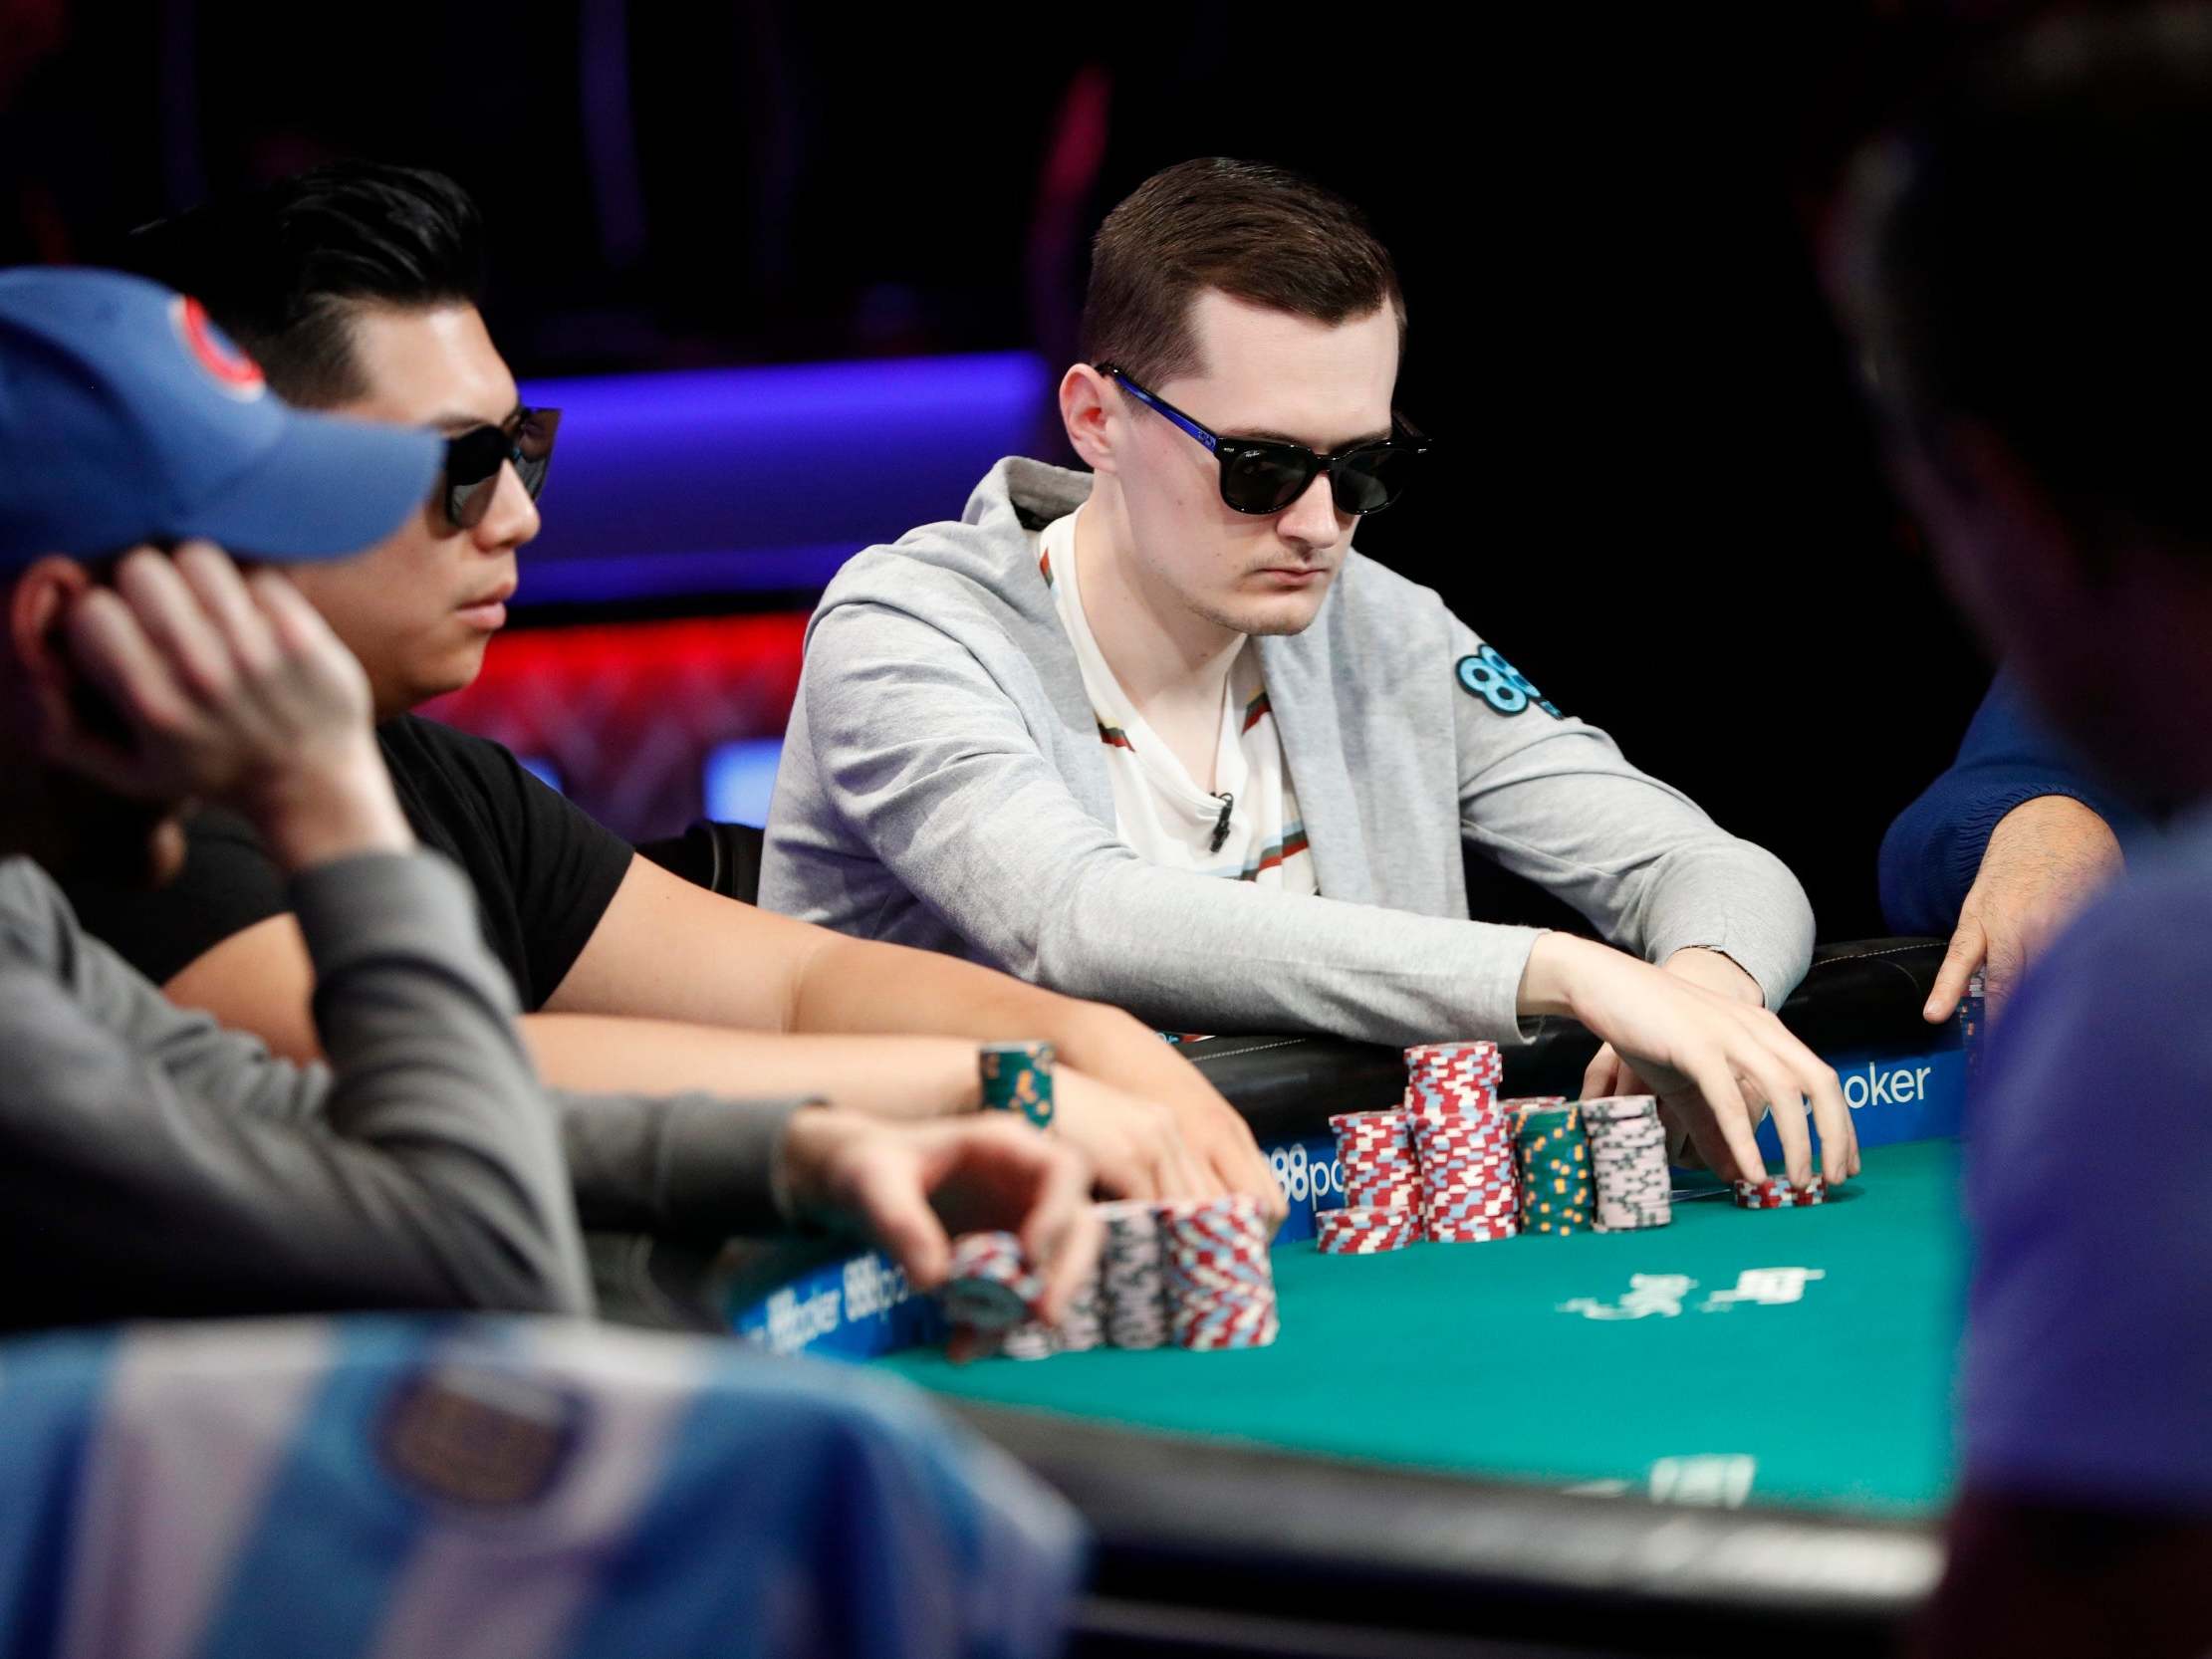 Nick Marchington (far right) competes during the World Series of Poker main event in Las Vegas, 12 July 2019.